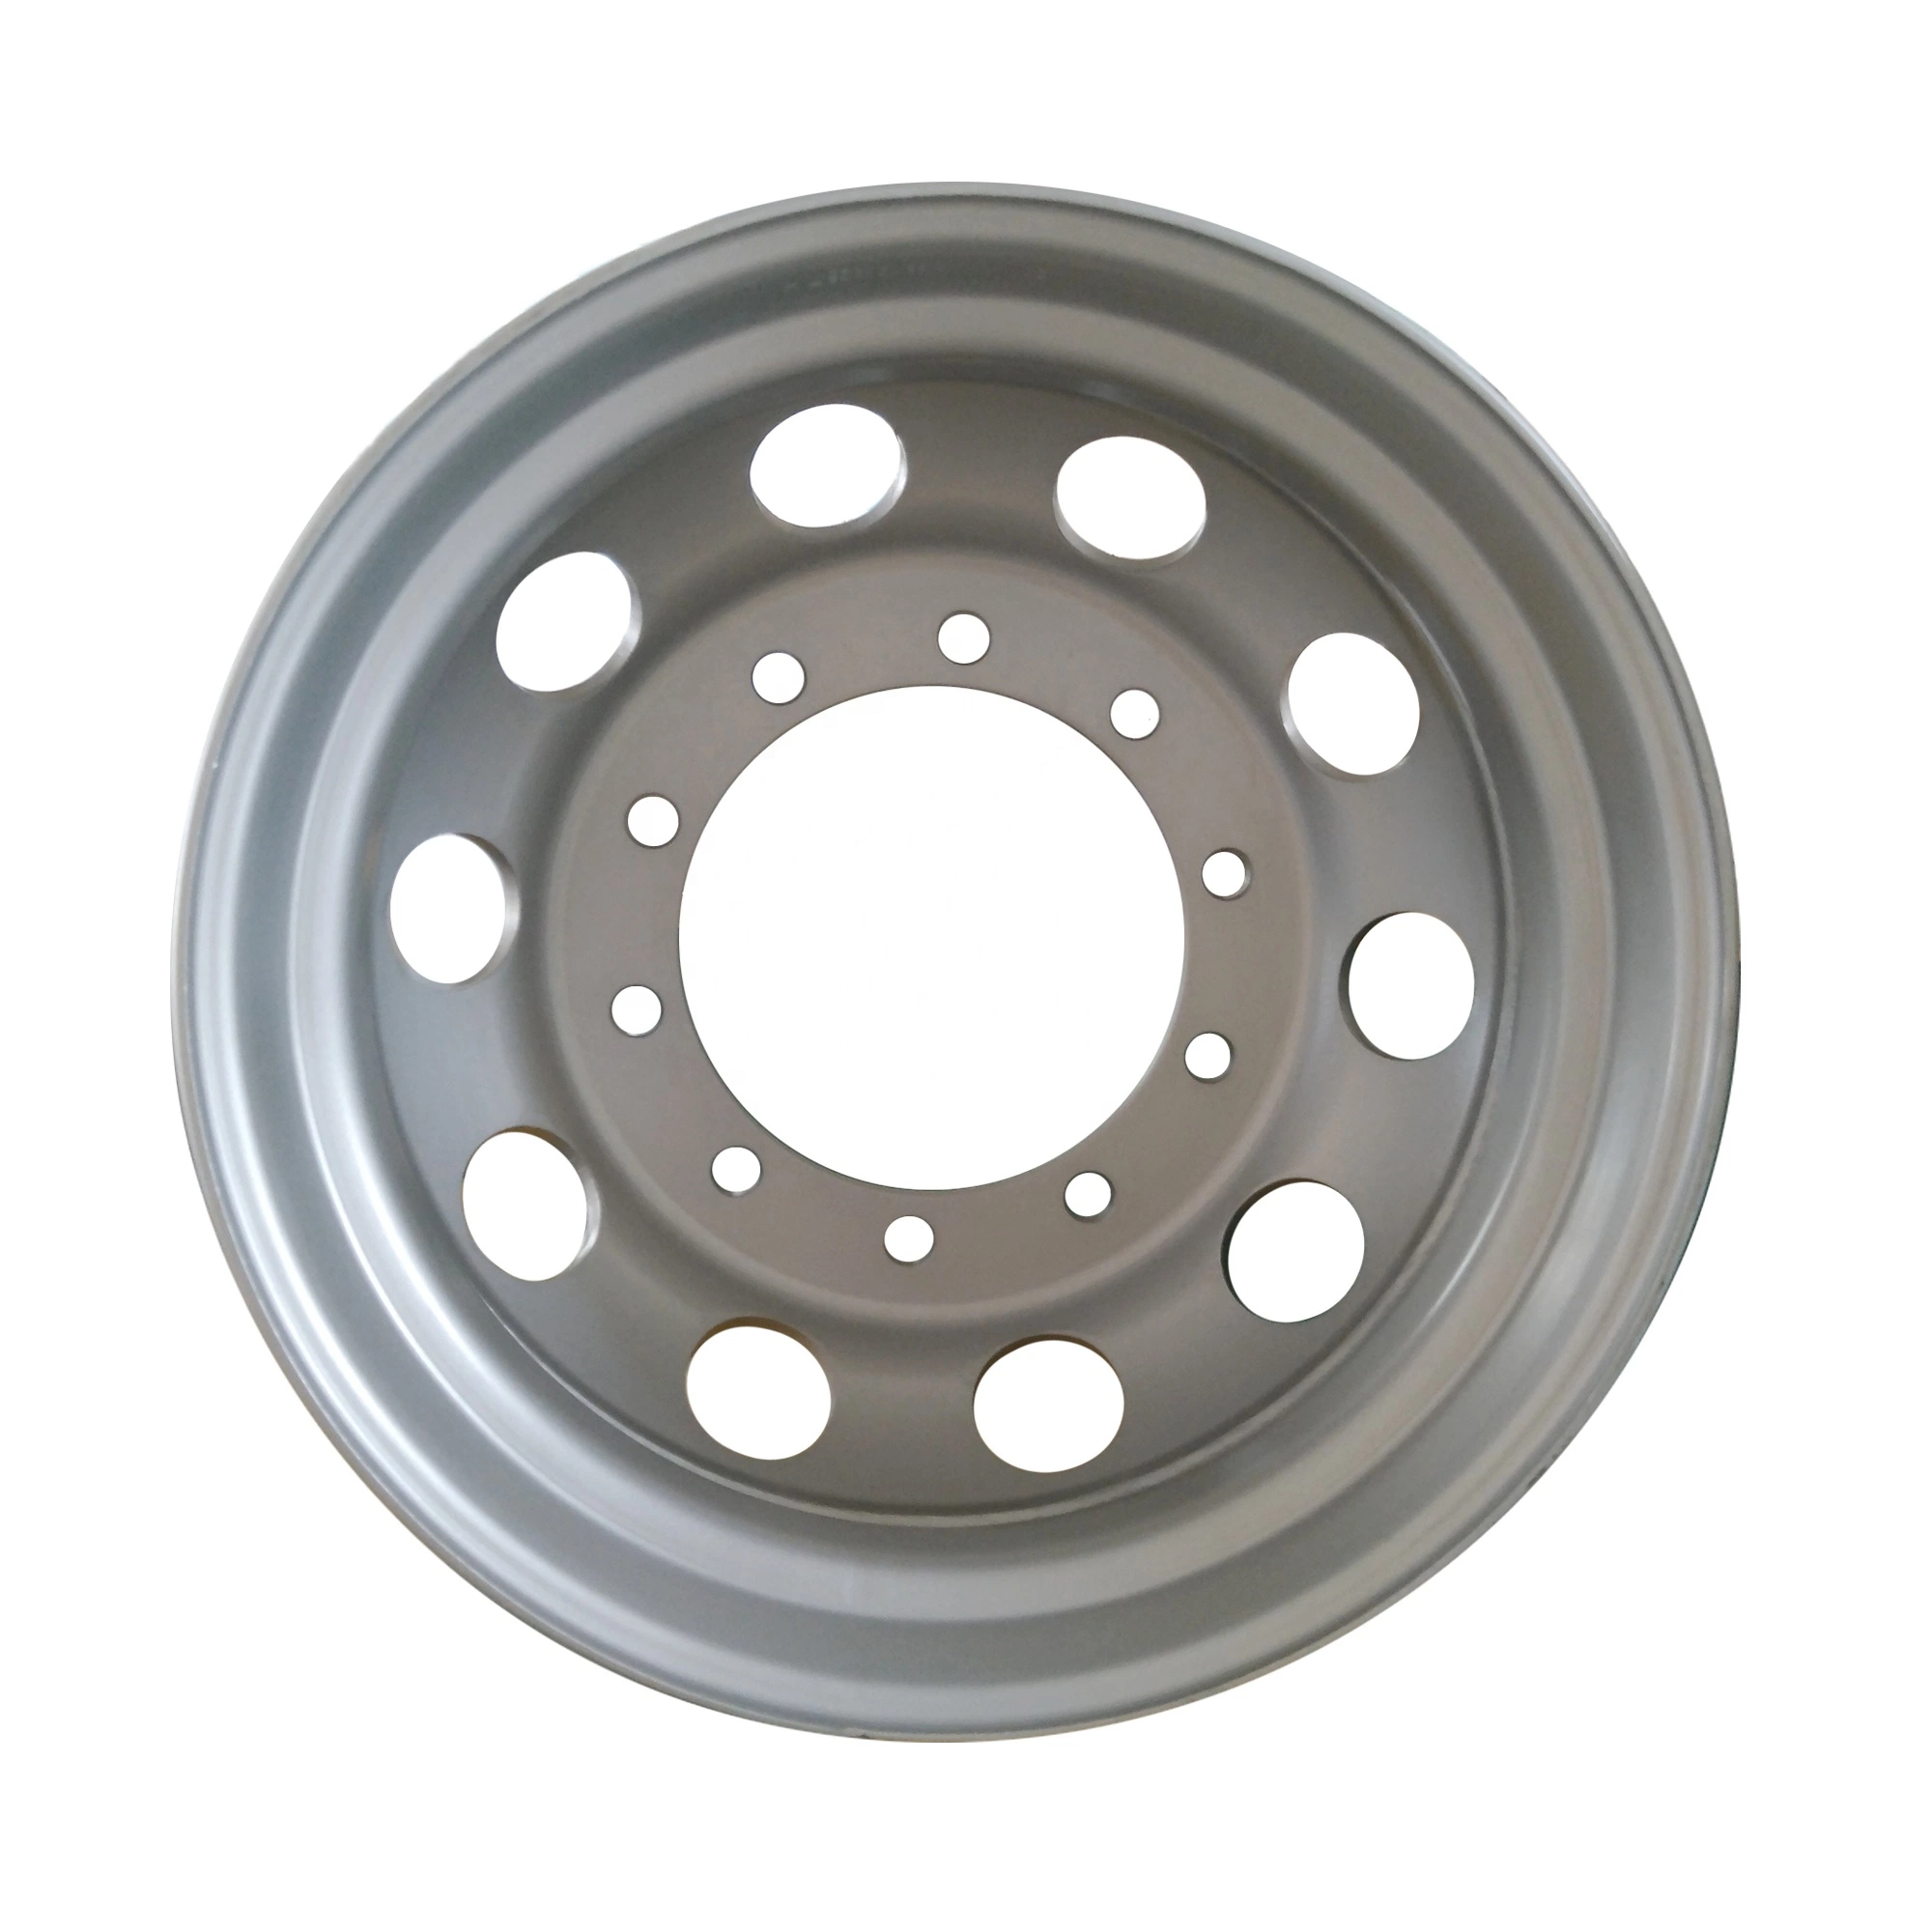 24.5-Inch Large Commercial Passenger Bus Tubeless Wheels, High Quality Products24.5X8.25